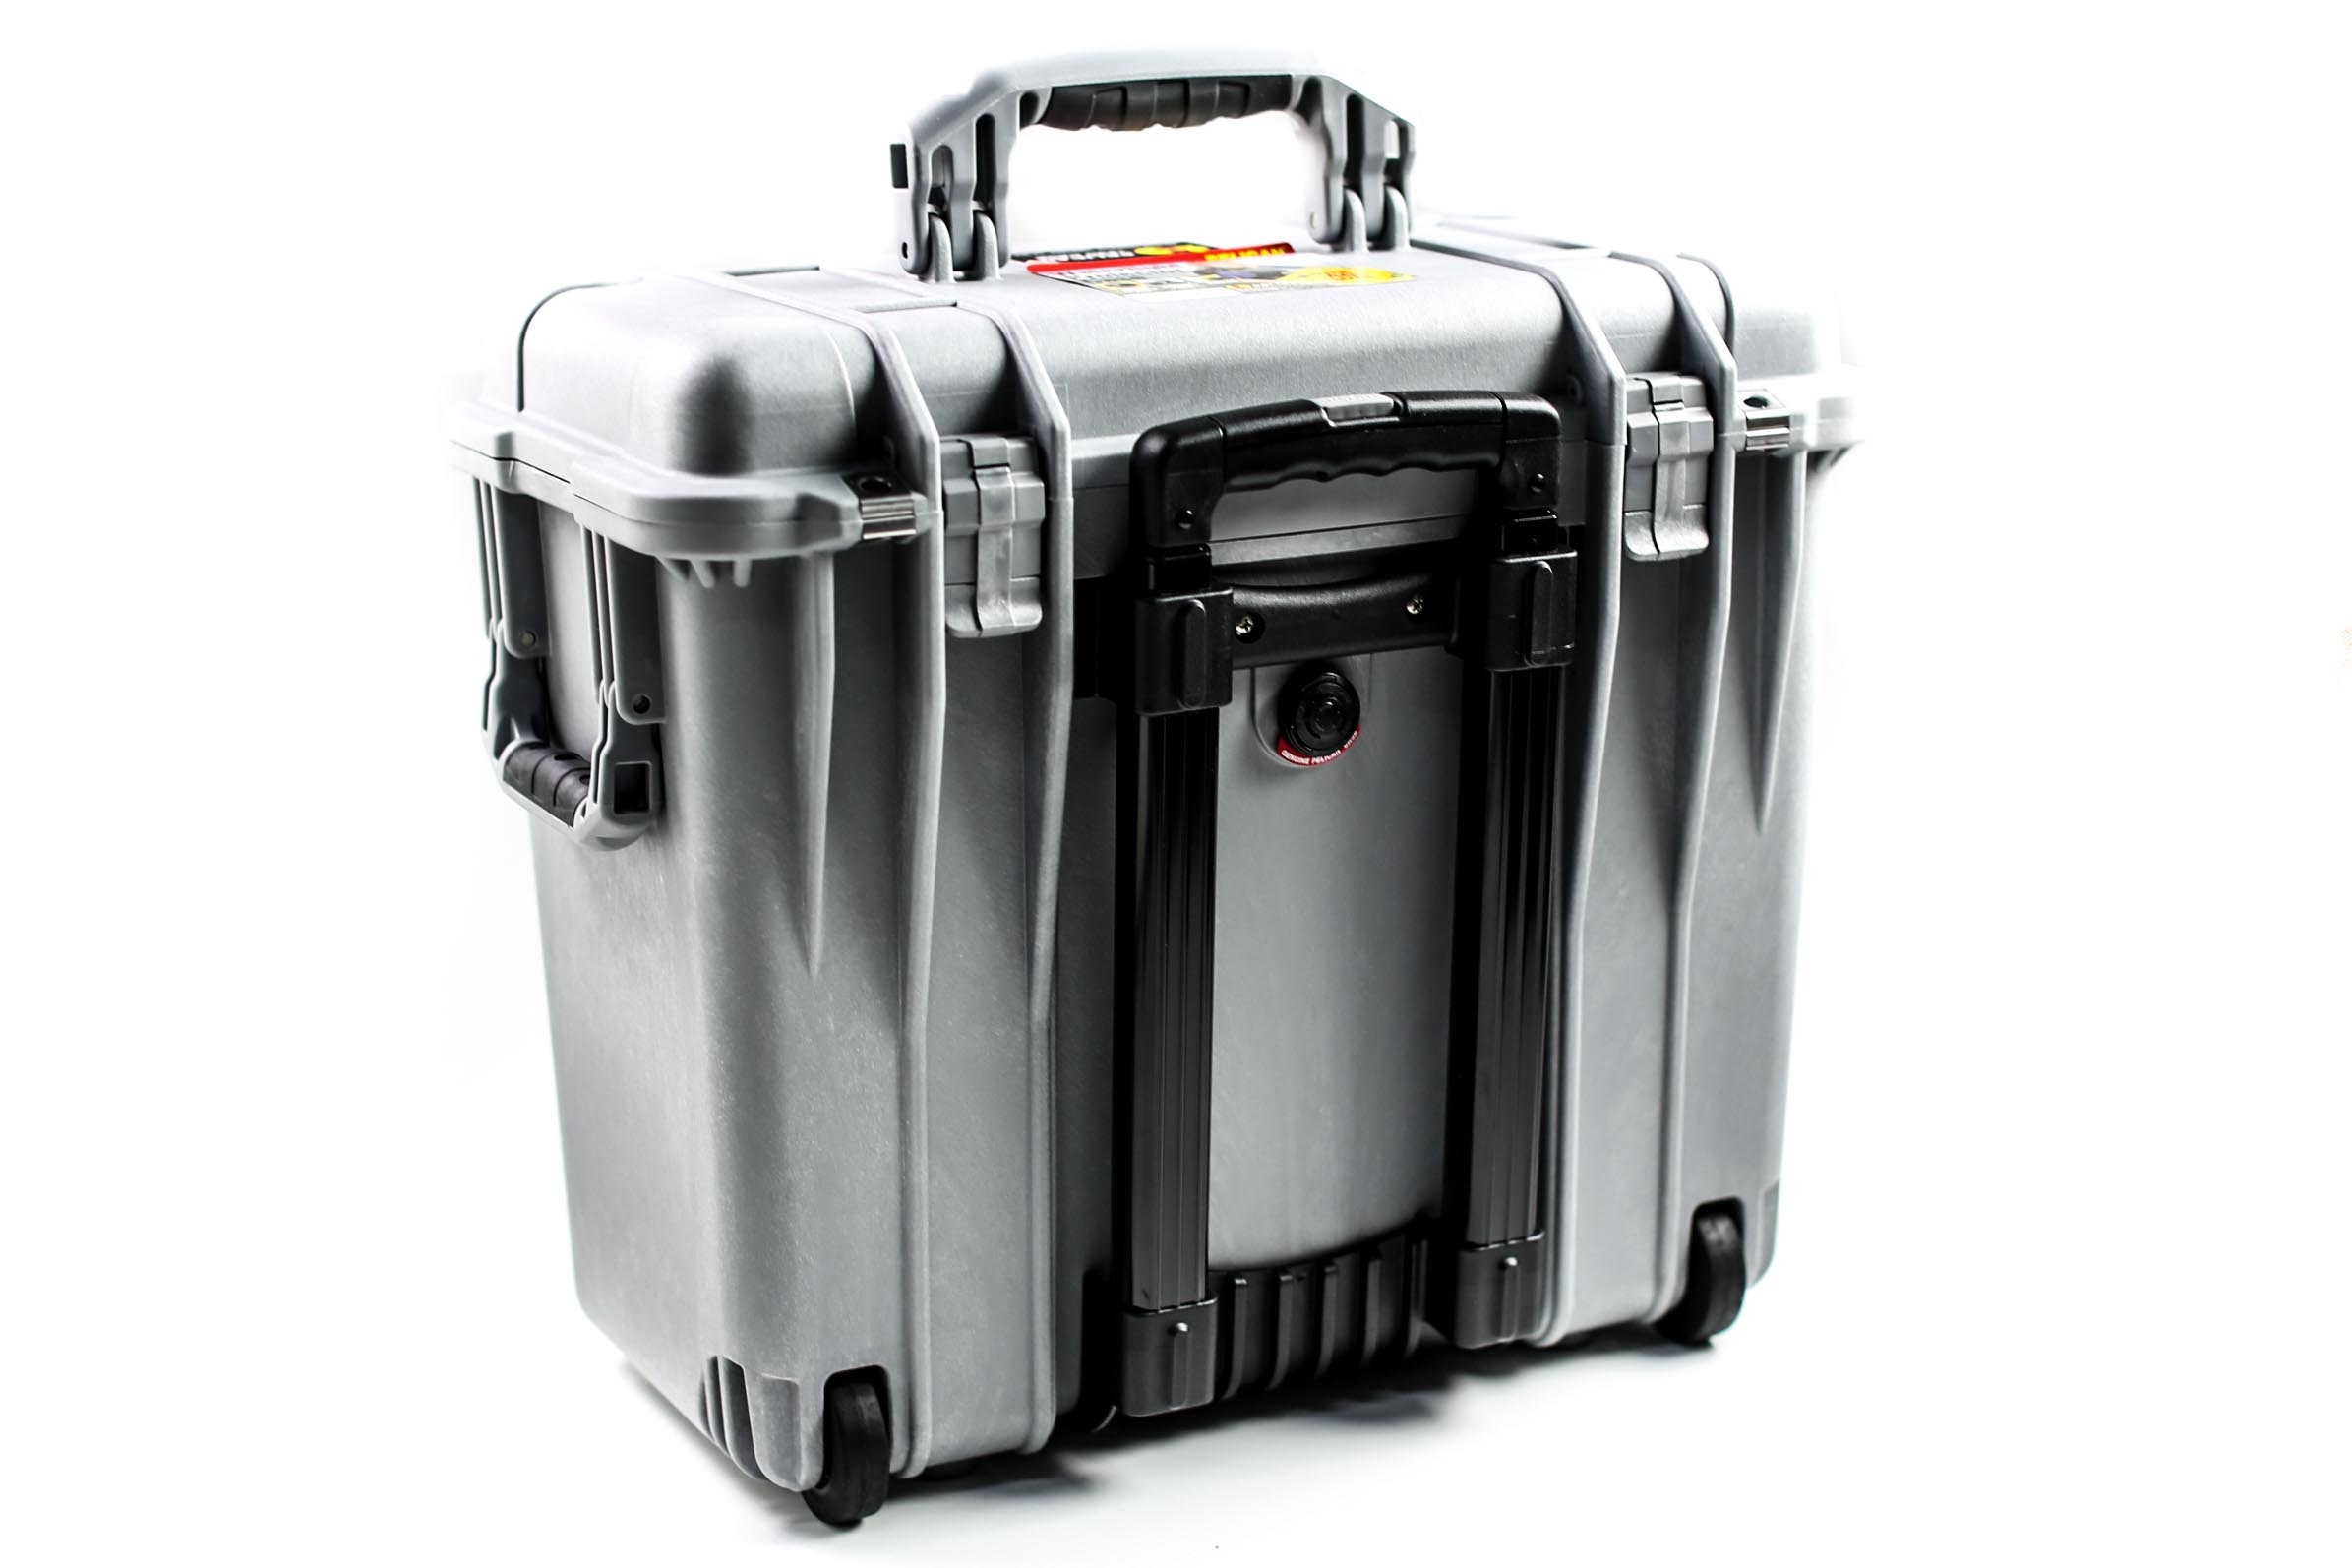 Pelican 1447 Top Loader Case with Office Dividers (Silver)